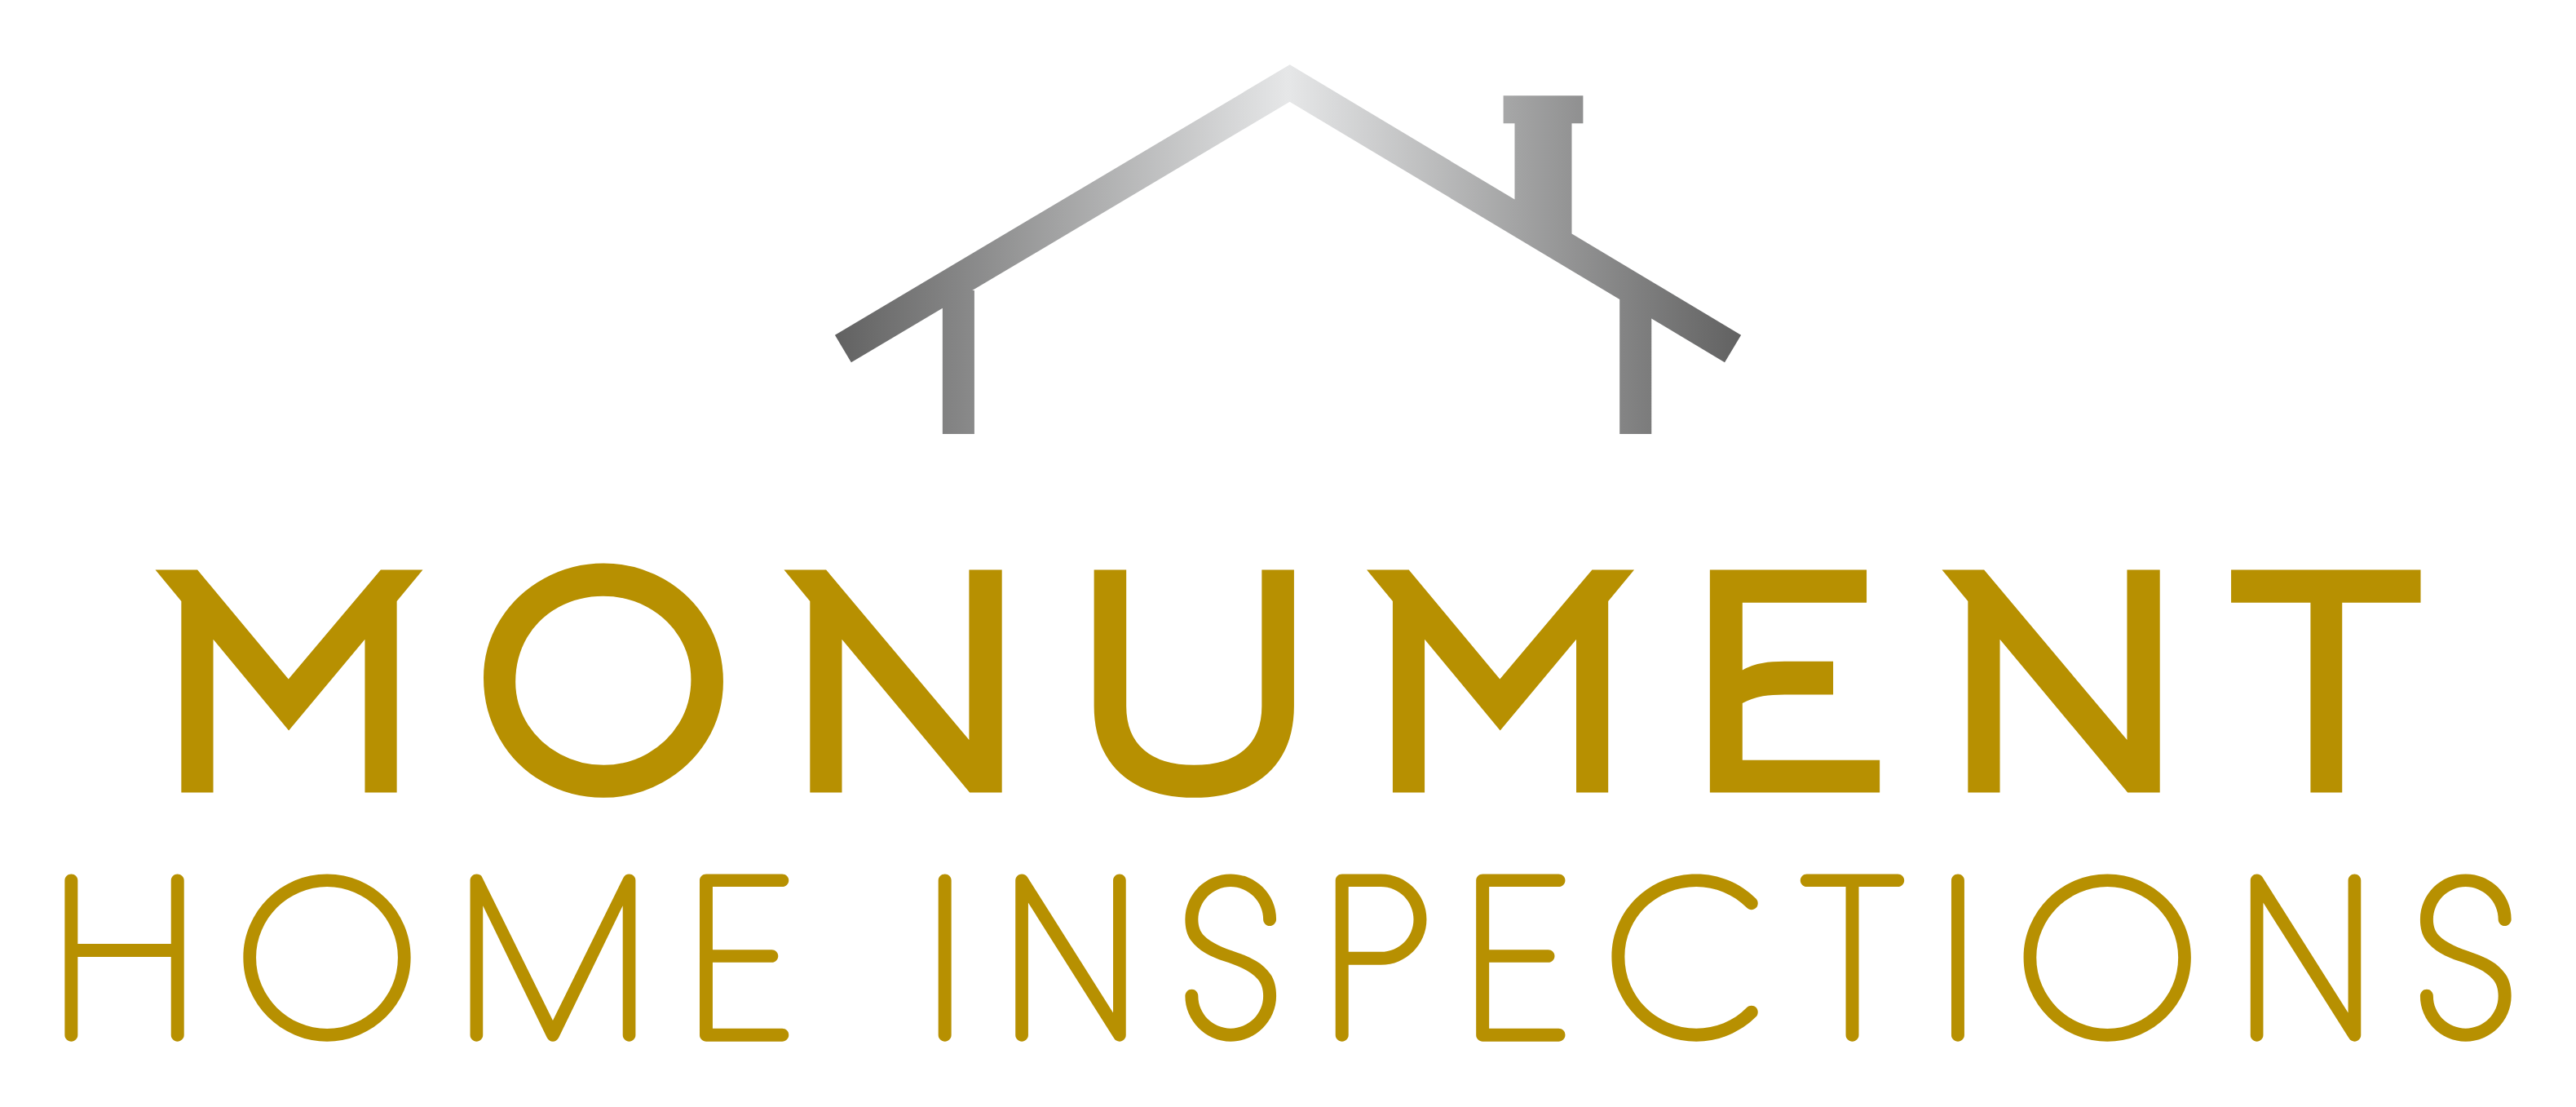 Monument Home Inspections